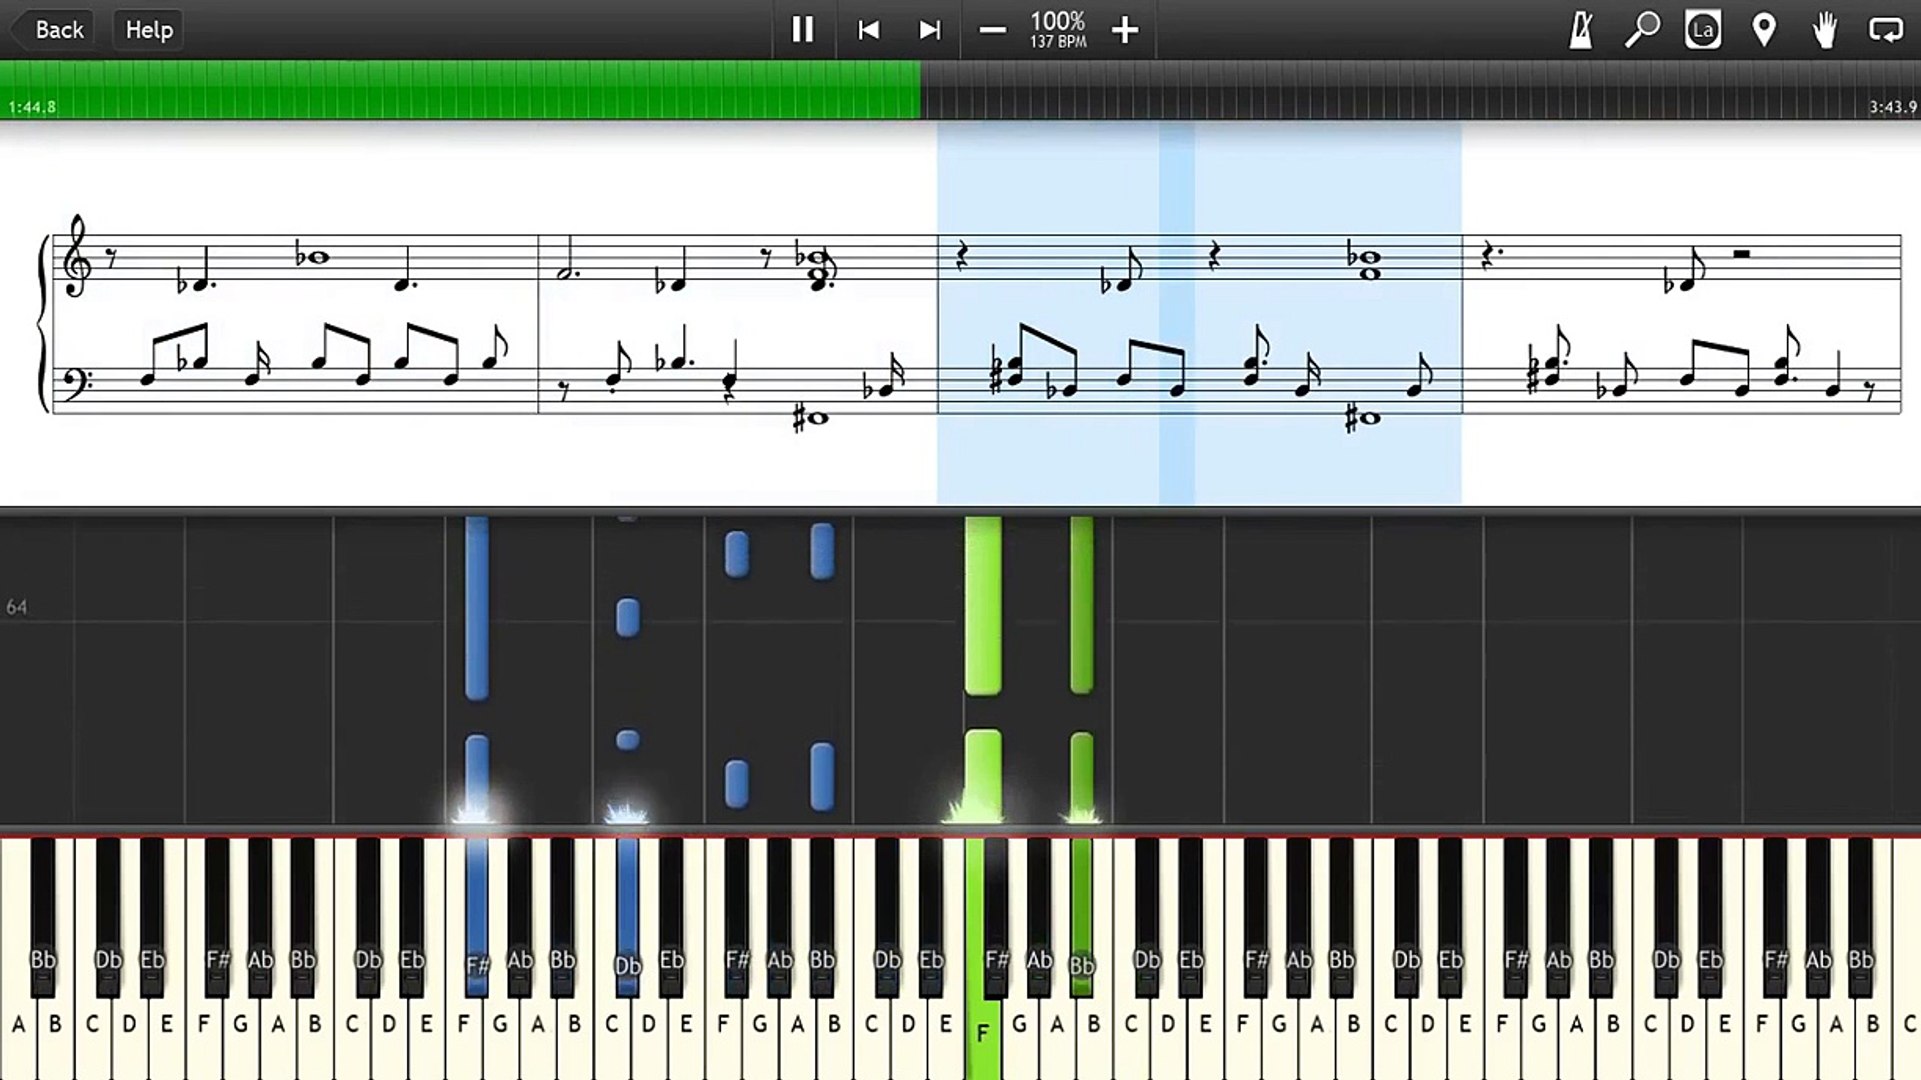 White Silence //Lucas King// [Synthesia - Piano Tutorial] - Tokyo Ghoul  (Music Sheet) - video Dailymotion